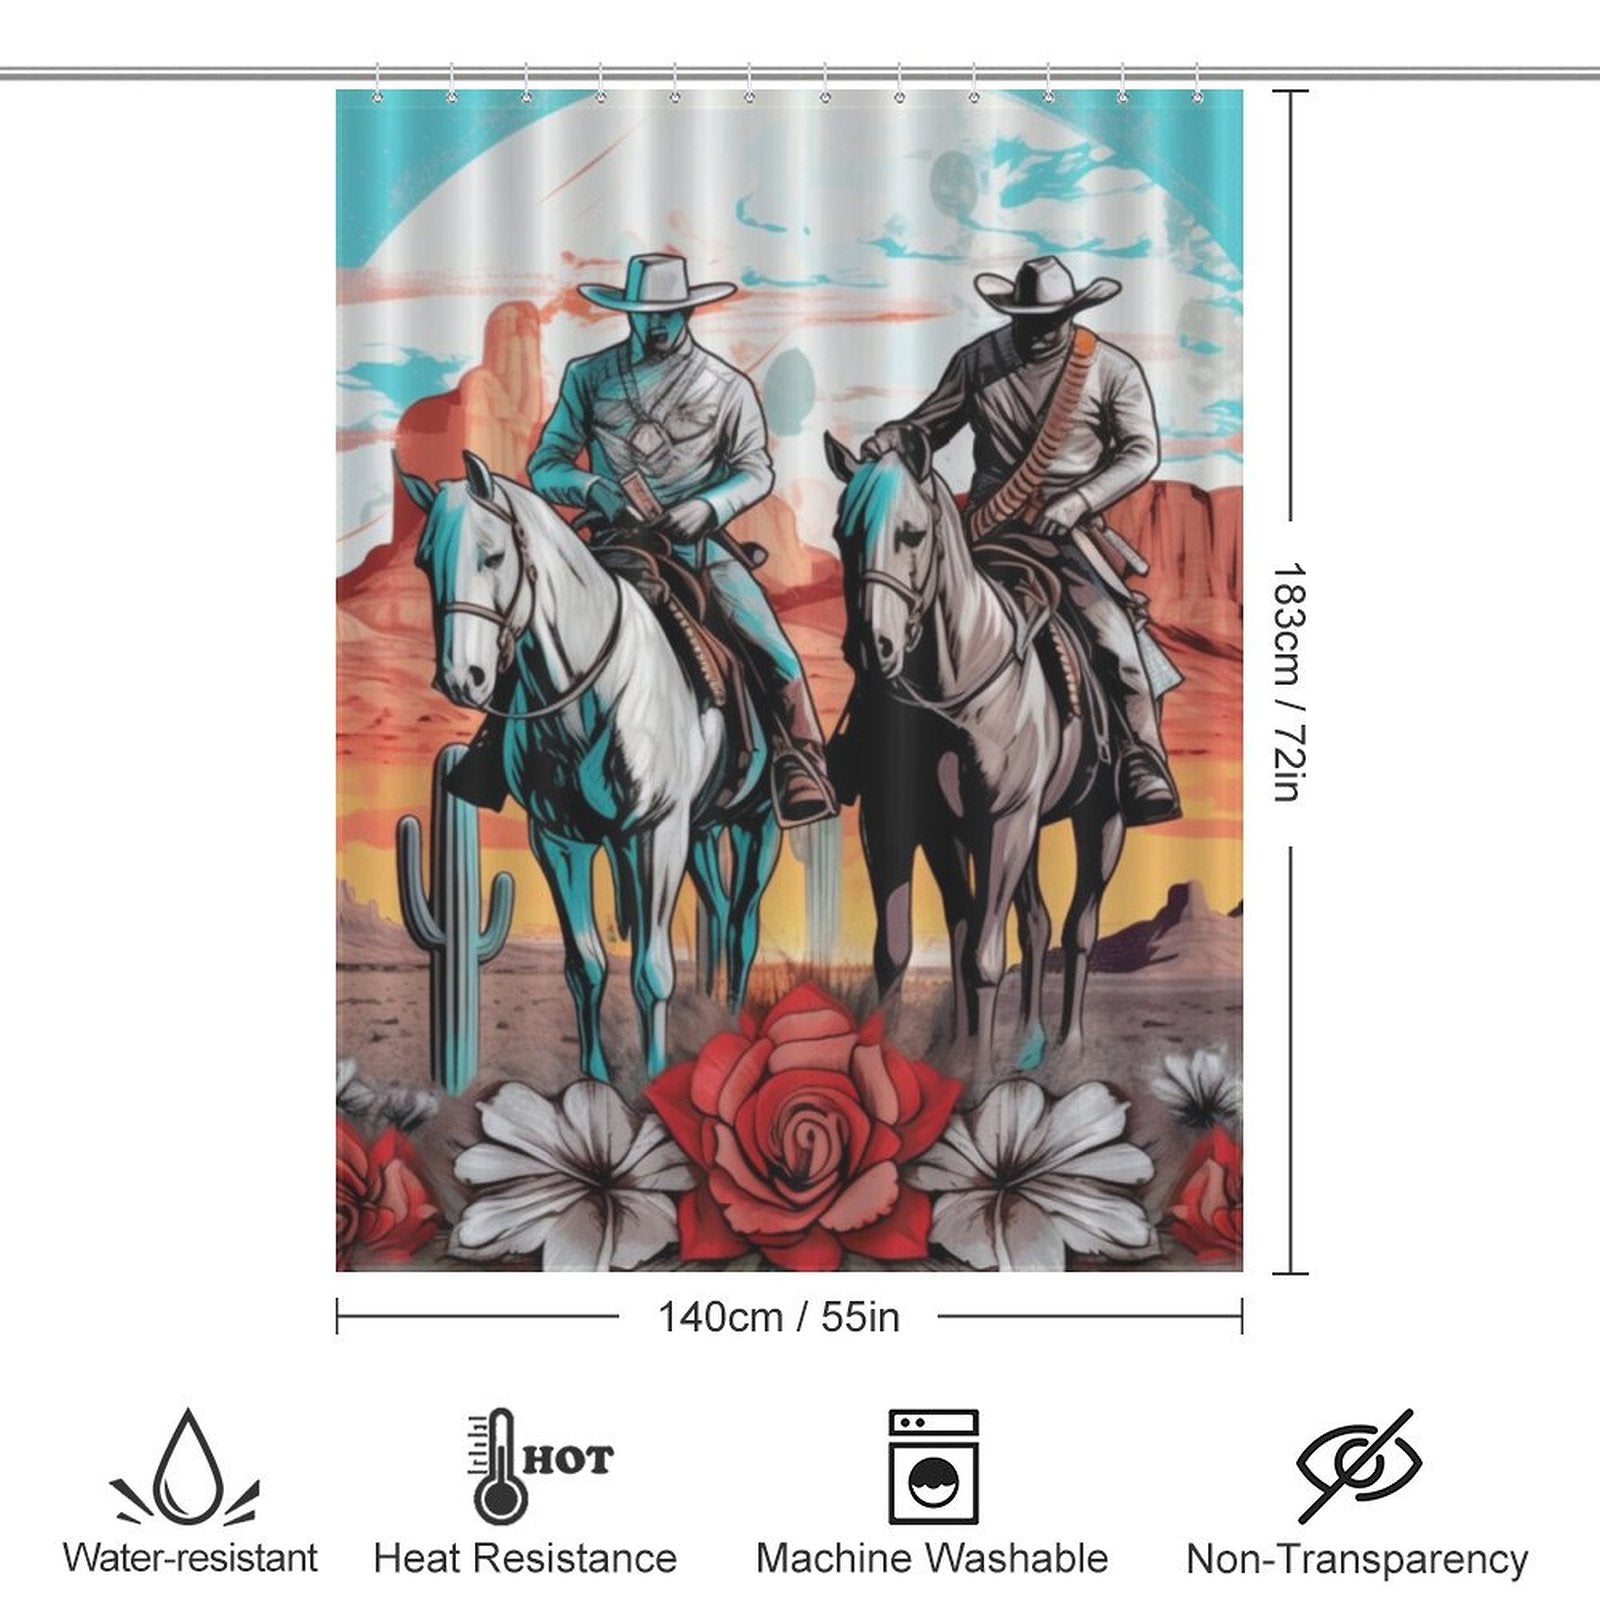 Western-themed bathroom shower curtain featuring two cowboys on horseback in a desert scene with cacti and flowers, dimensions 183cm x 140cm, and symbols indicating water resistance, heat resistance, machine washability, and non-transparency. Product Name: Cowboy Riding Horses Western Shower Curtain-Cottoncat from Brand Name: Cotton Cat